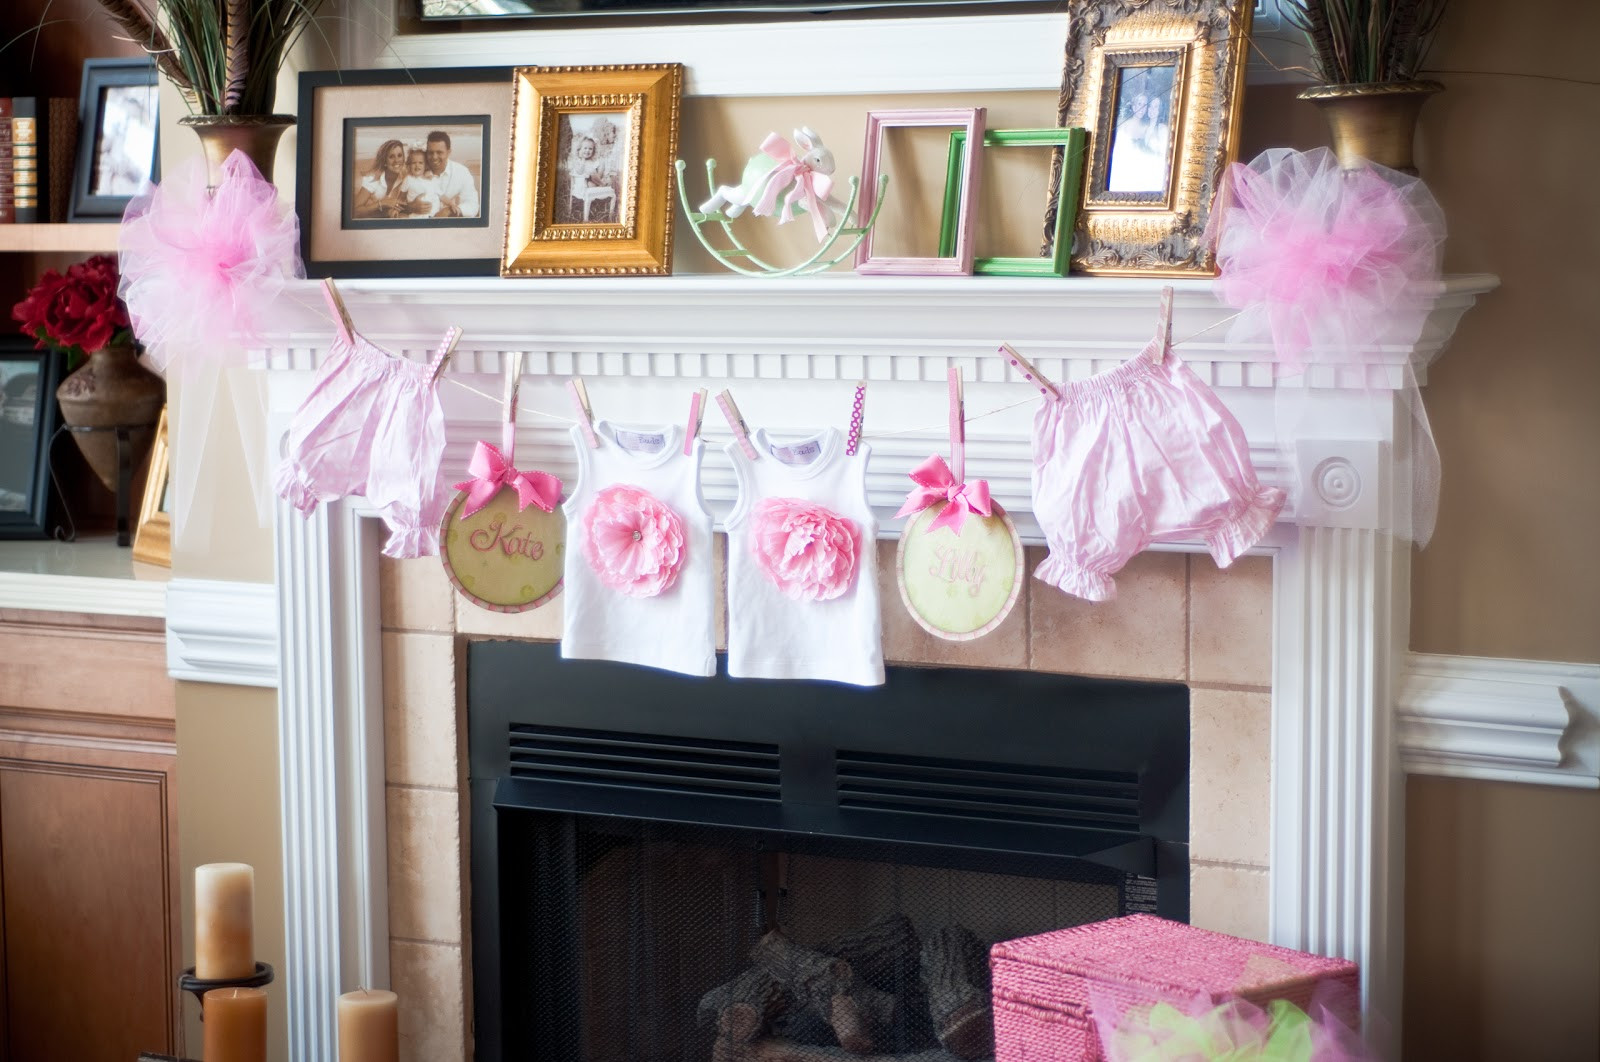 Decorating Ideas For Girl Baby Shower
 paws & re thread baby shower decorating ideas clothes